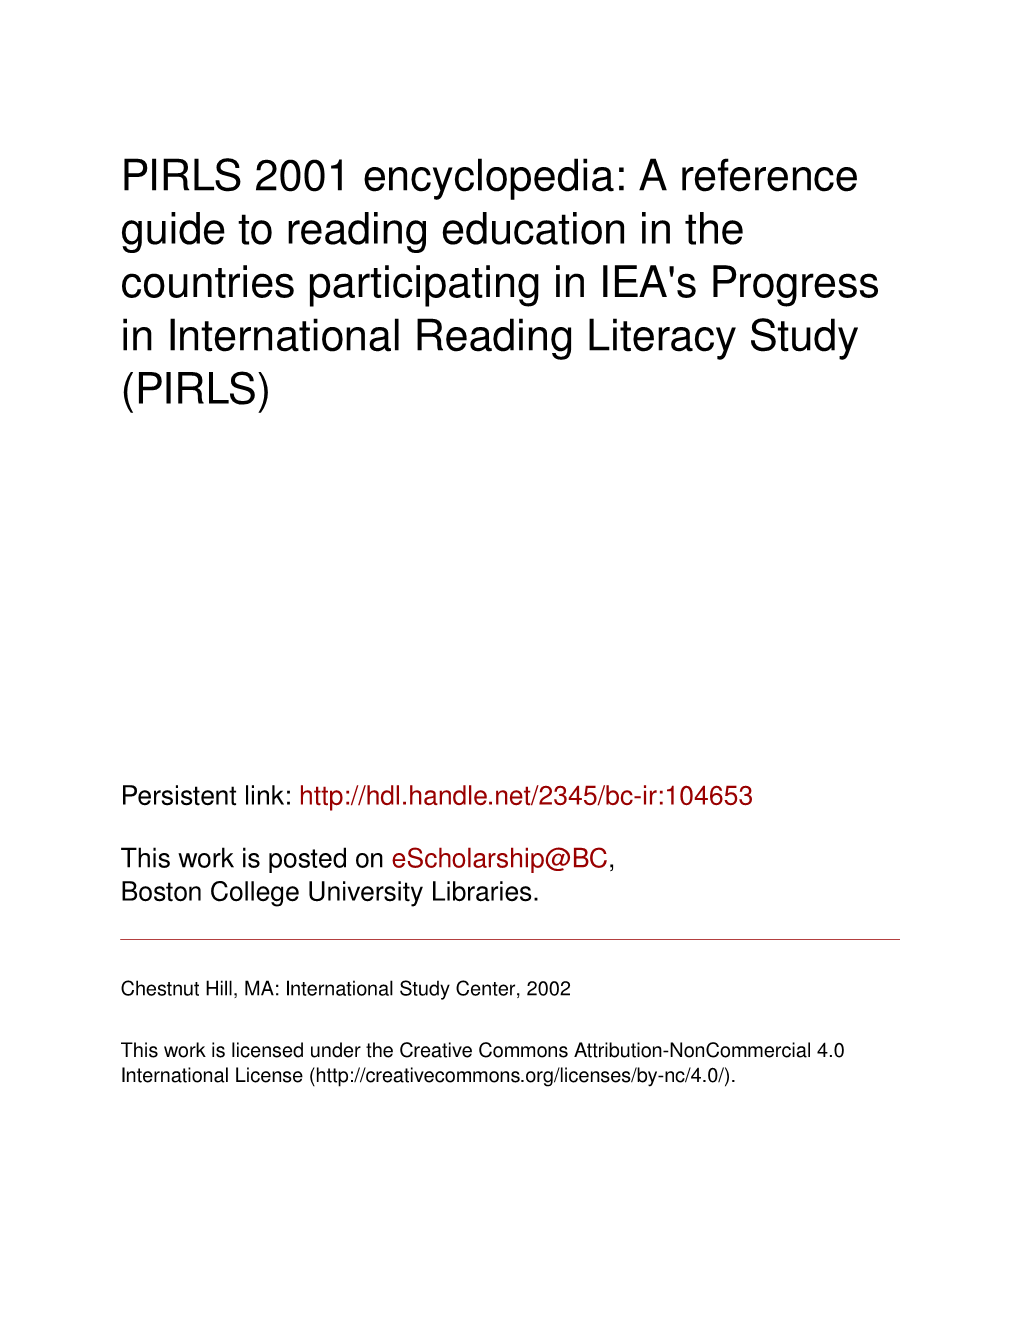 PIRLS 2001 Encyclopedia: a Reference Guide to Reading Education in the Countries Participating in IEA's Progress in International Reading Literacy Study (PIRLS)